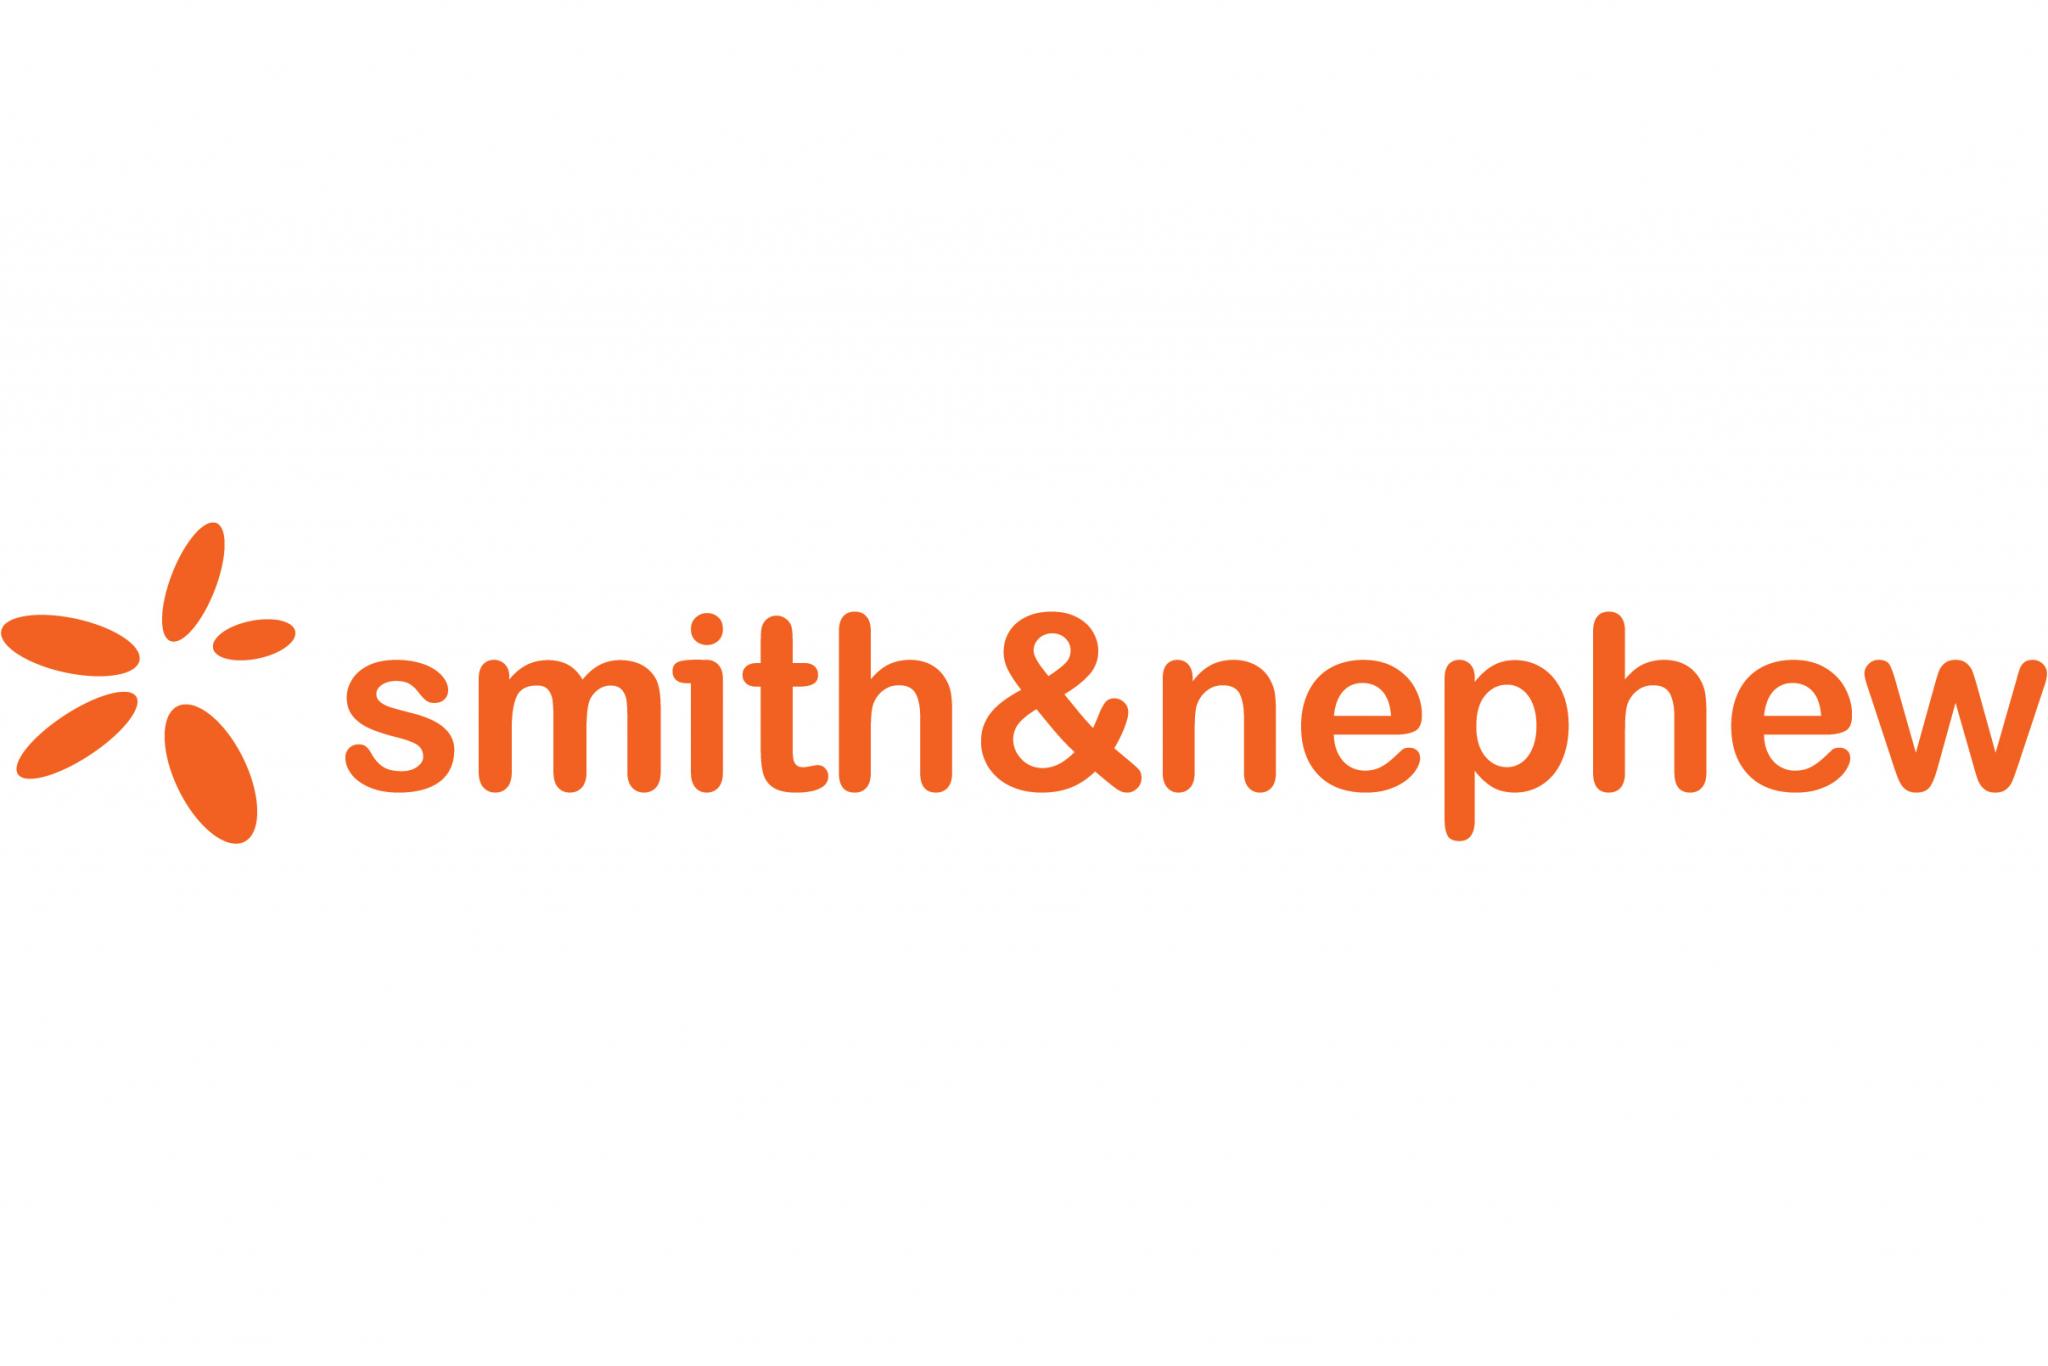 Arthrex asks Supreme Court to hear appeal in $85M loss to Smith & Nephew